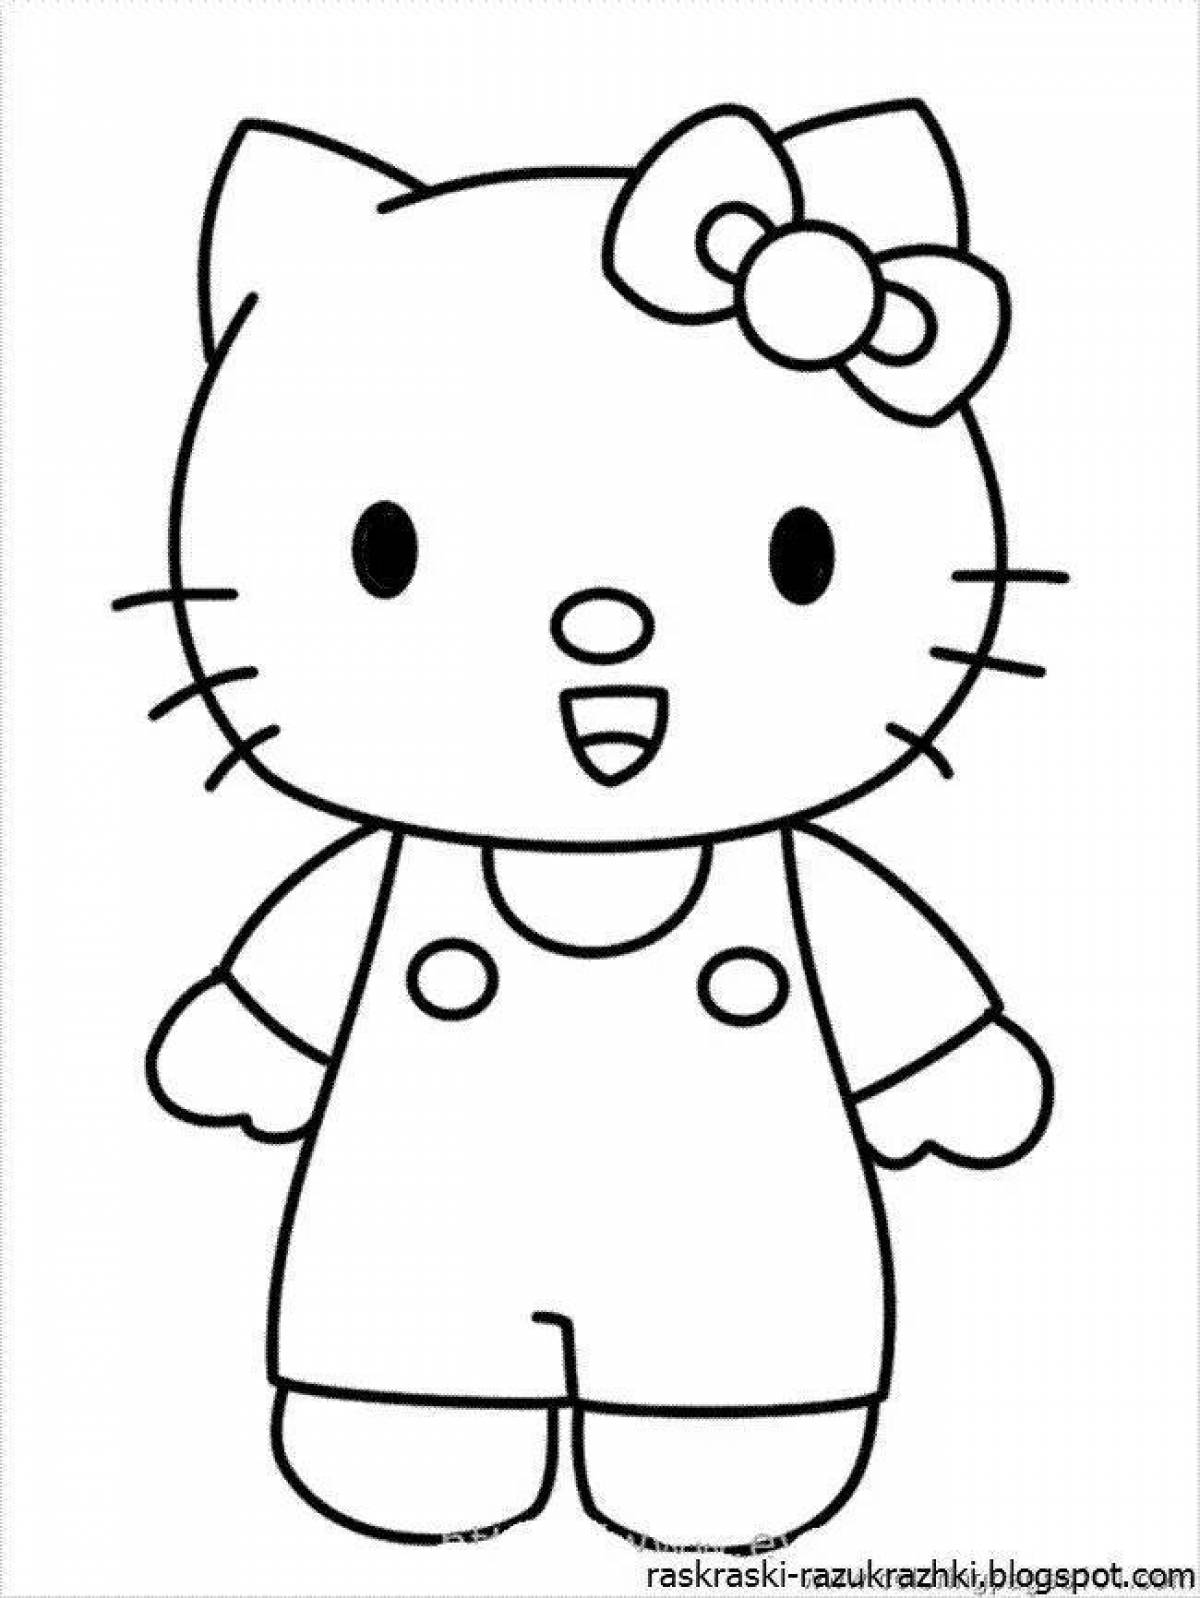 Coloring pages for girls 2 years old